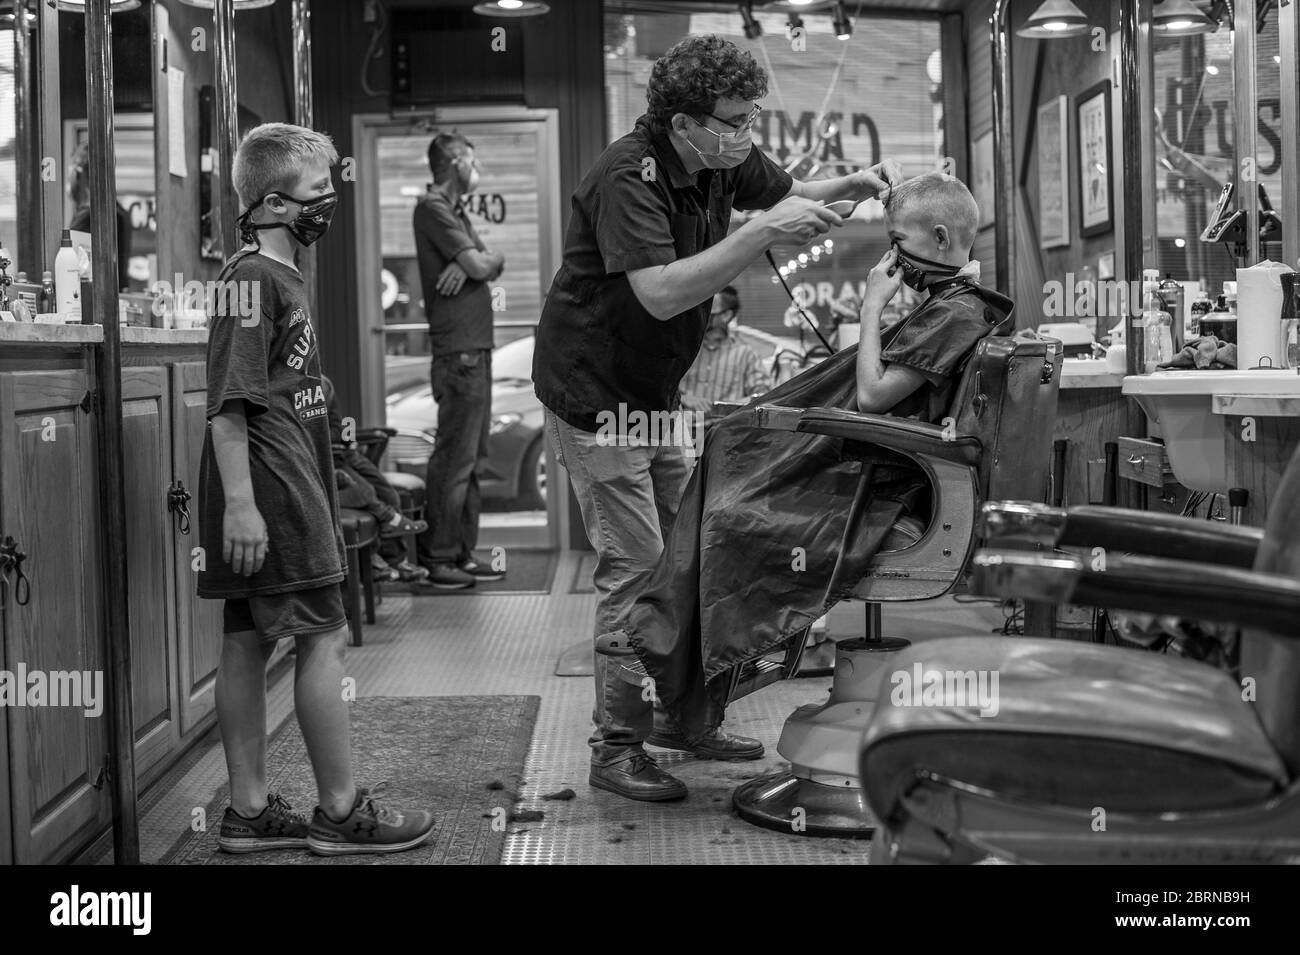 May 20, 2020, Manhattan, Kansas, USA: DYLAN ROBERTS, center, cuts CLARK WEDDLE'S, 10, hair on Wednesday as LANCE MULLET, left, watches. MULLET, has been staying with the WEDDLE'S as his mother works long hours as a custodian at a local Church. Campus Barbershop in Aggieville, Kansas's oldest shopping district, has been open for two days after being closed since March, 17. May, 18, was the first day of Phase 1.5 of the plan to reopen Kansas's economy. ROBERTS, restricting the number of patrons inside the barbershop did allow the family to come in together. (Credit Image: © Luke Townsend/ZUMA Wi Stock Photo